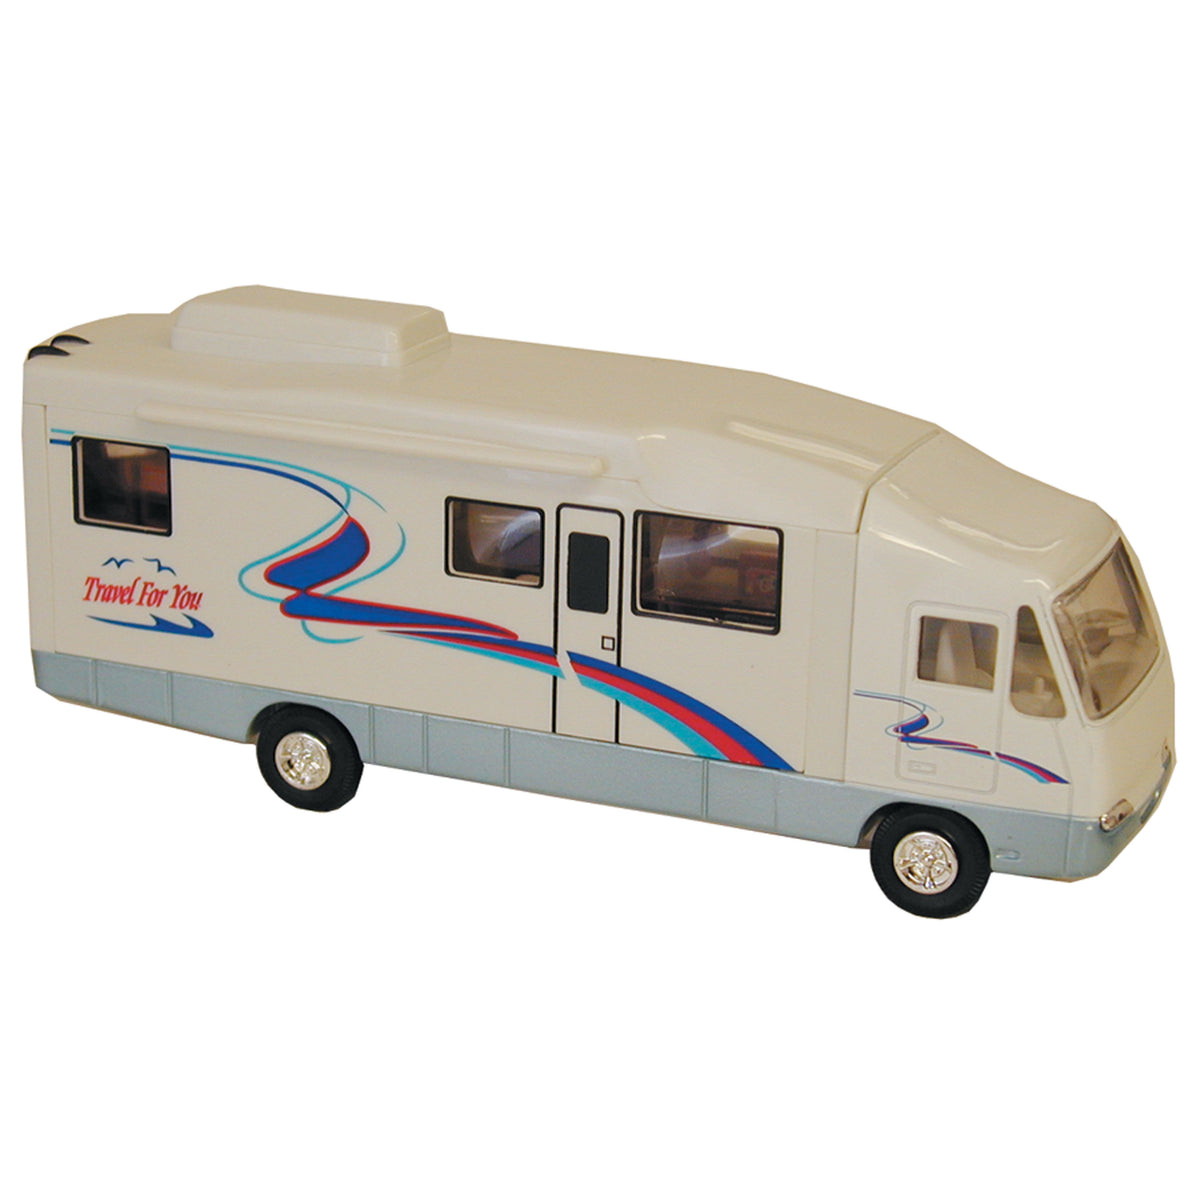 Prime Products 27-0001 RV Toys - Class A Motor Home